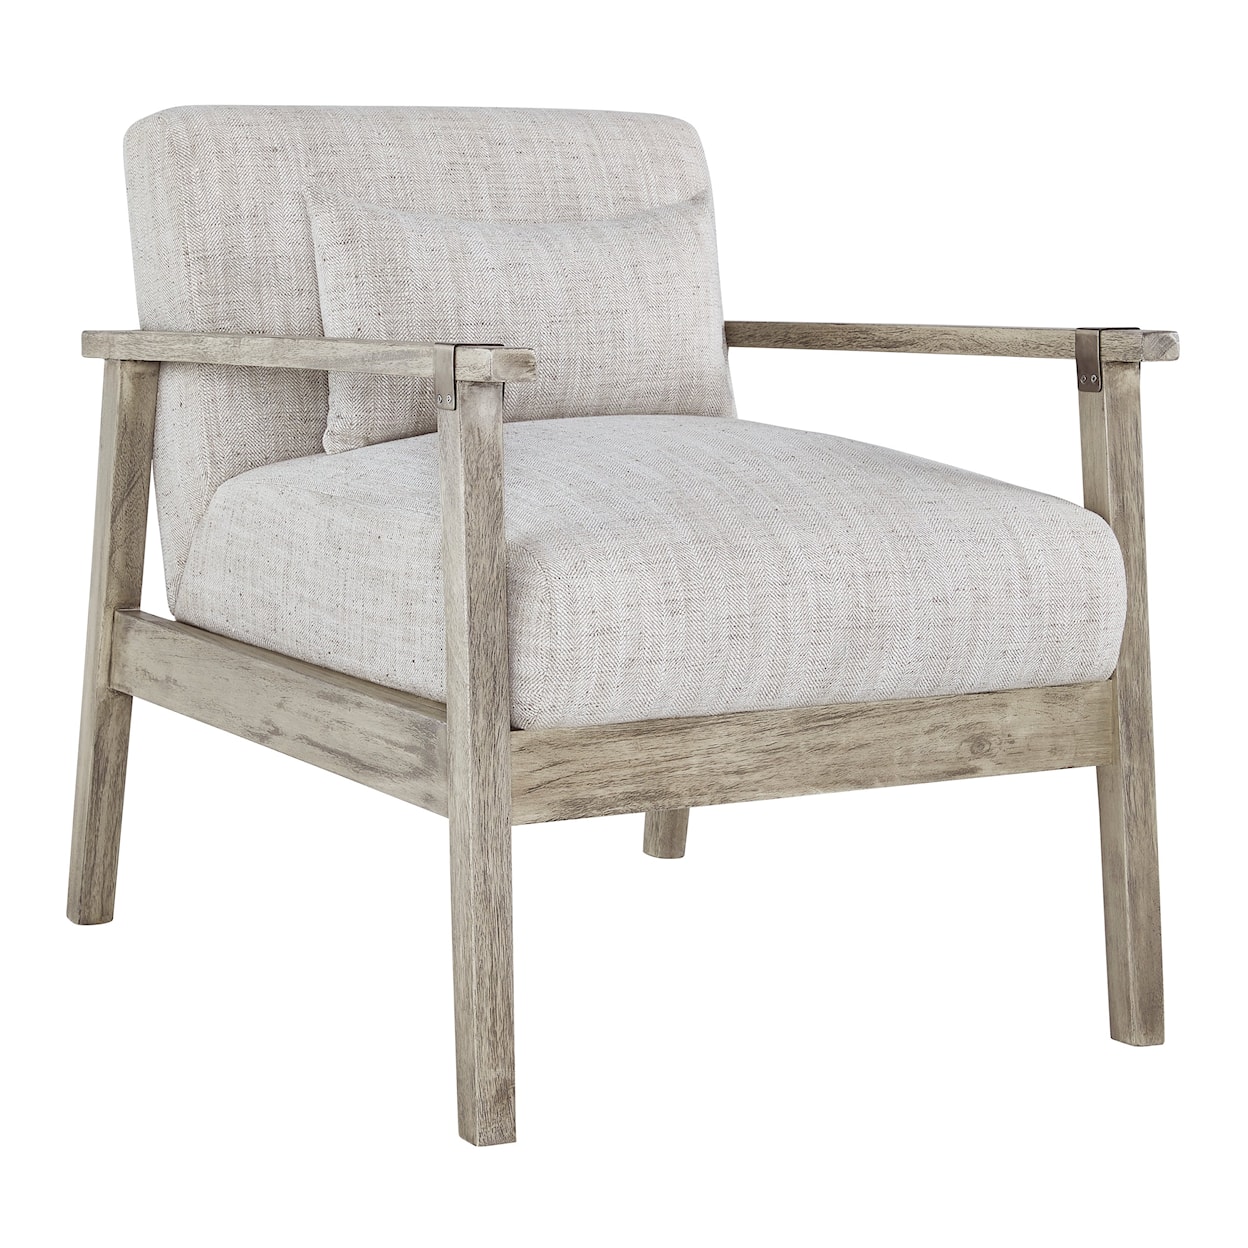 Benchcraft Dalenville Accent Chair